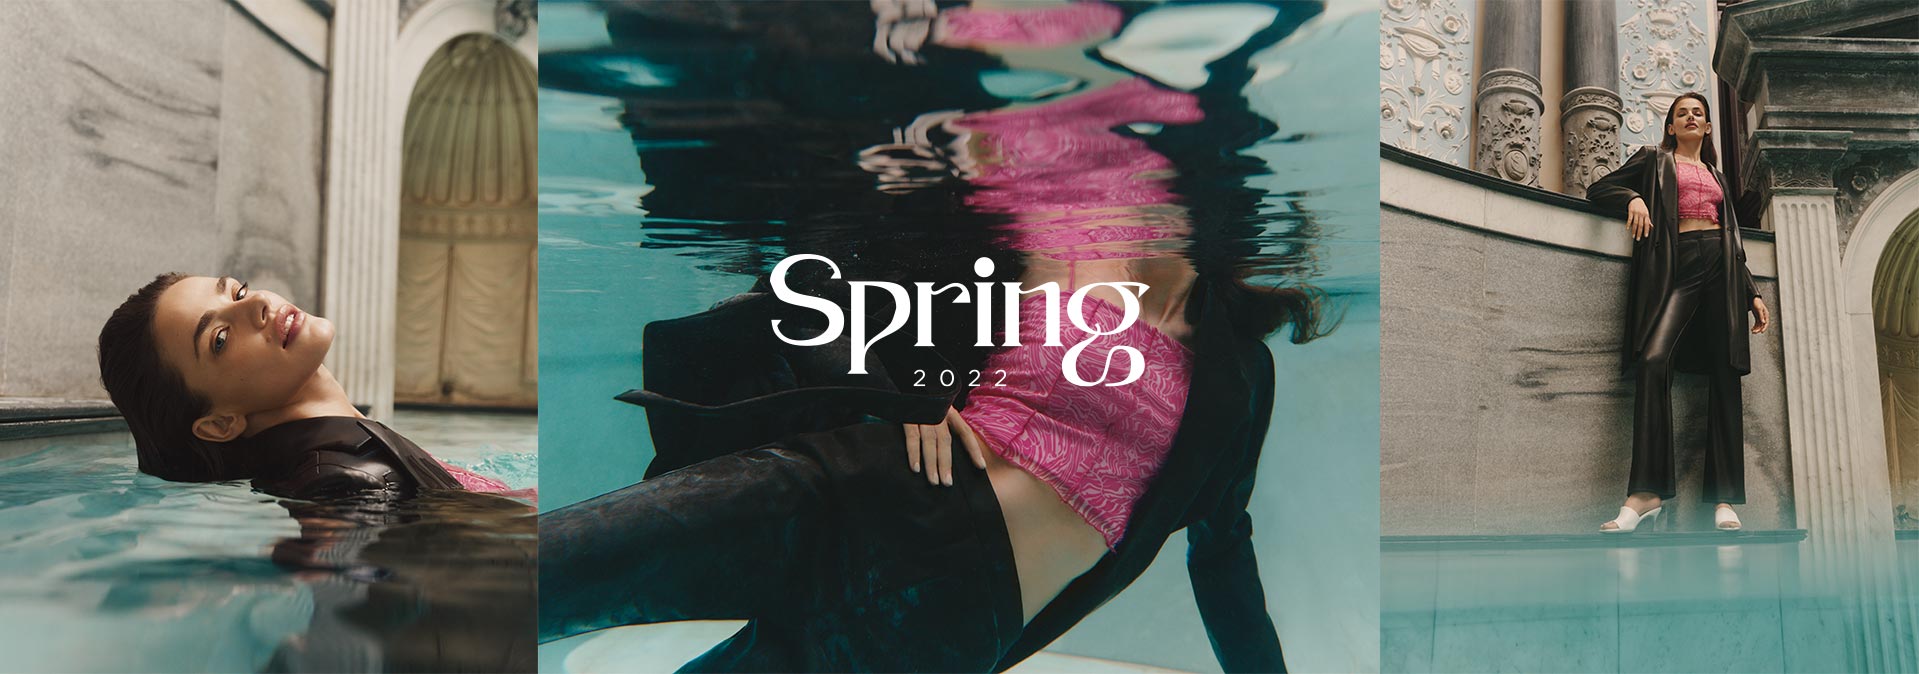 SS22 Campaign Spring